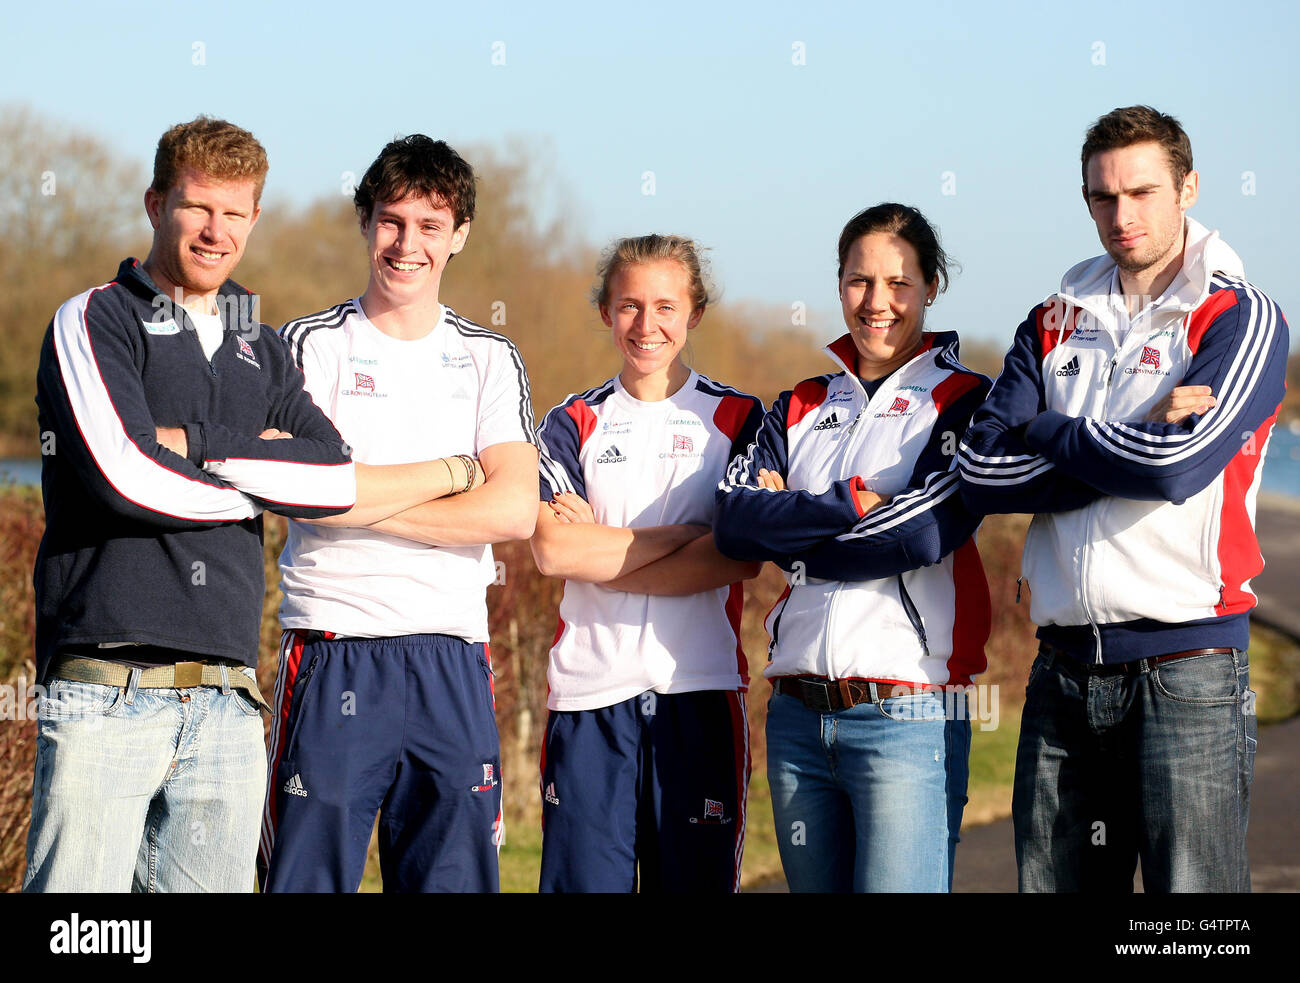 Great Britain's (left to right) Nathaniel Reilly-O'Donnell, Kieran Emery, Kat Copeland, Jess Eddie and Matt Wells during a training day at the Redgrave-Pinsent Lake, Caversham. Stock Photo